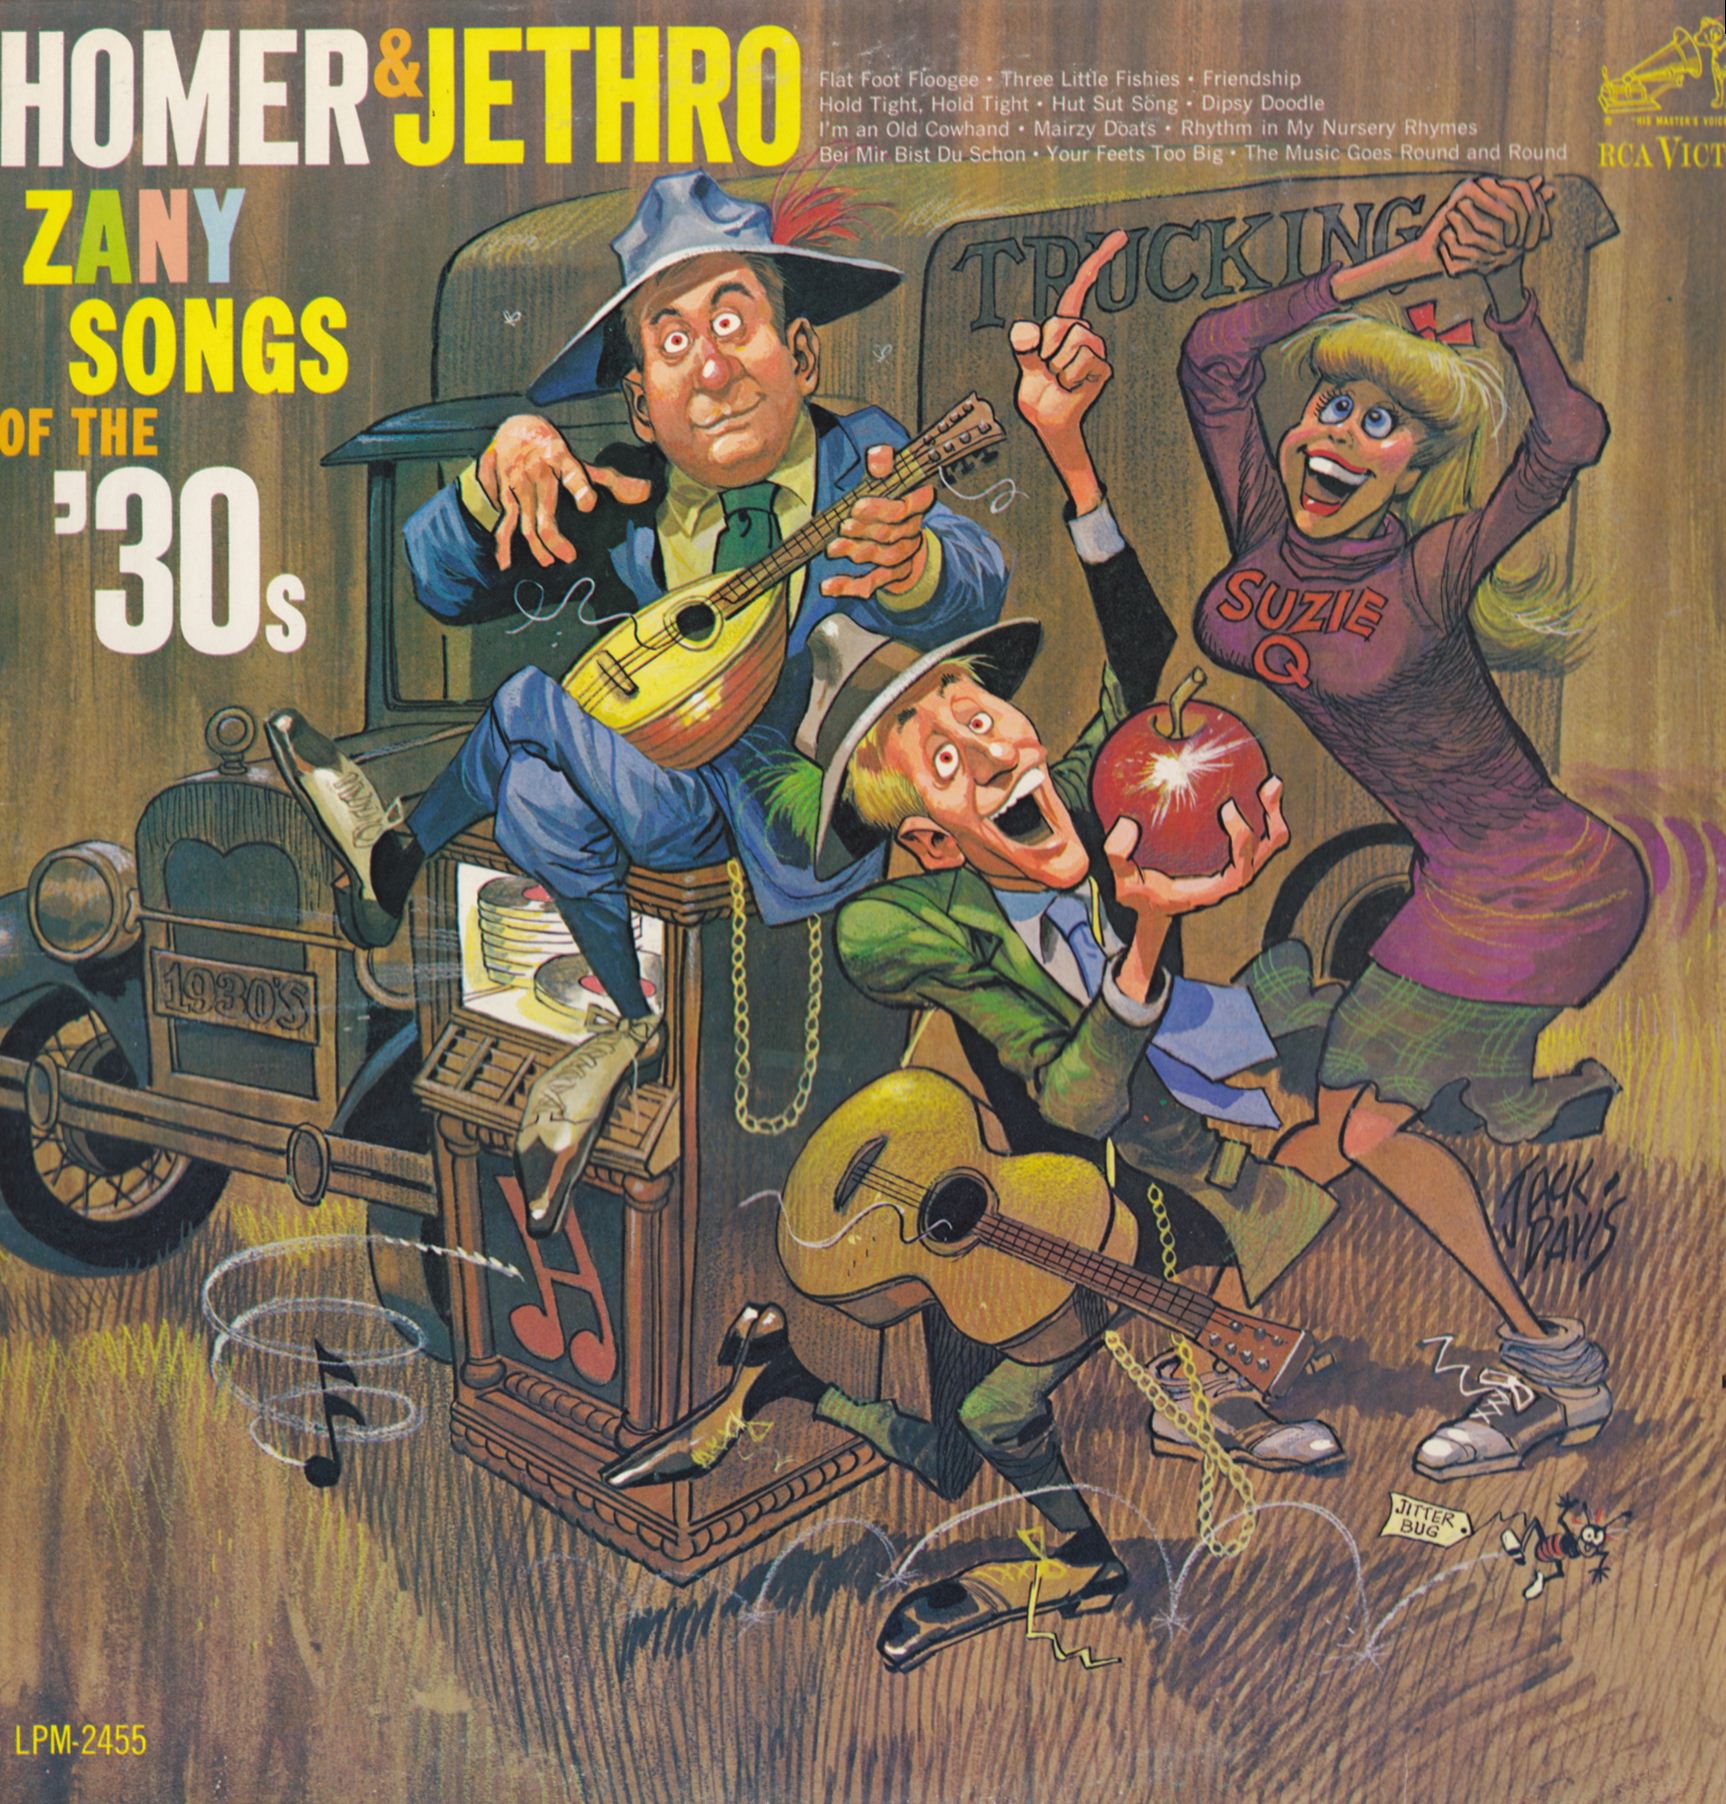 homer-and-jethro-zany-songs-of-the-30s.j